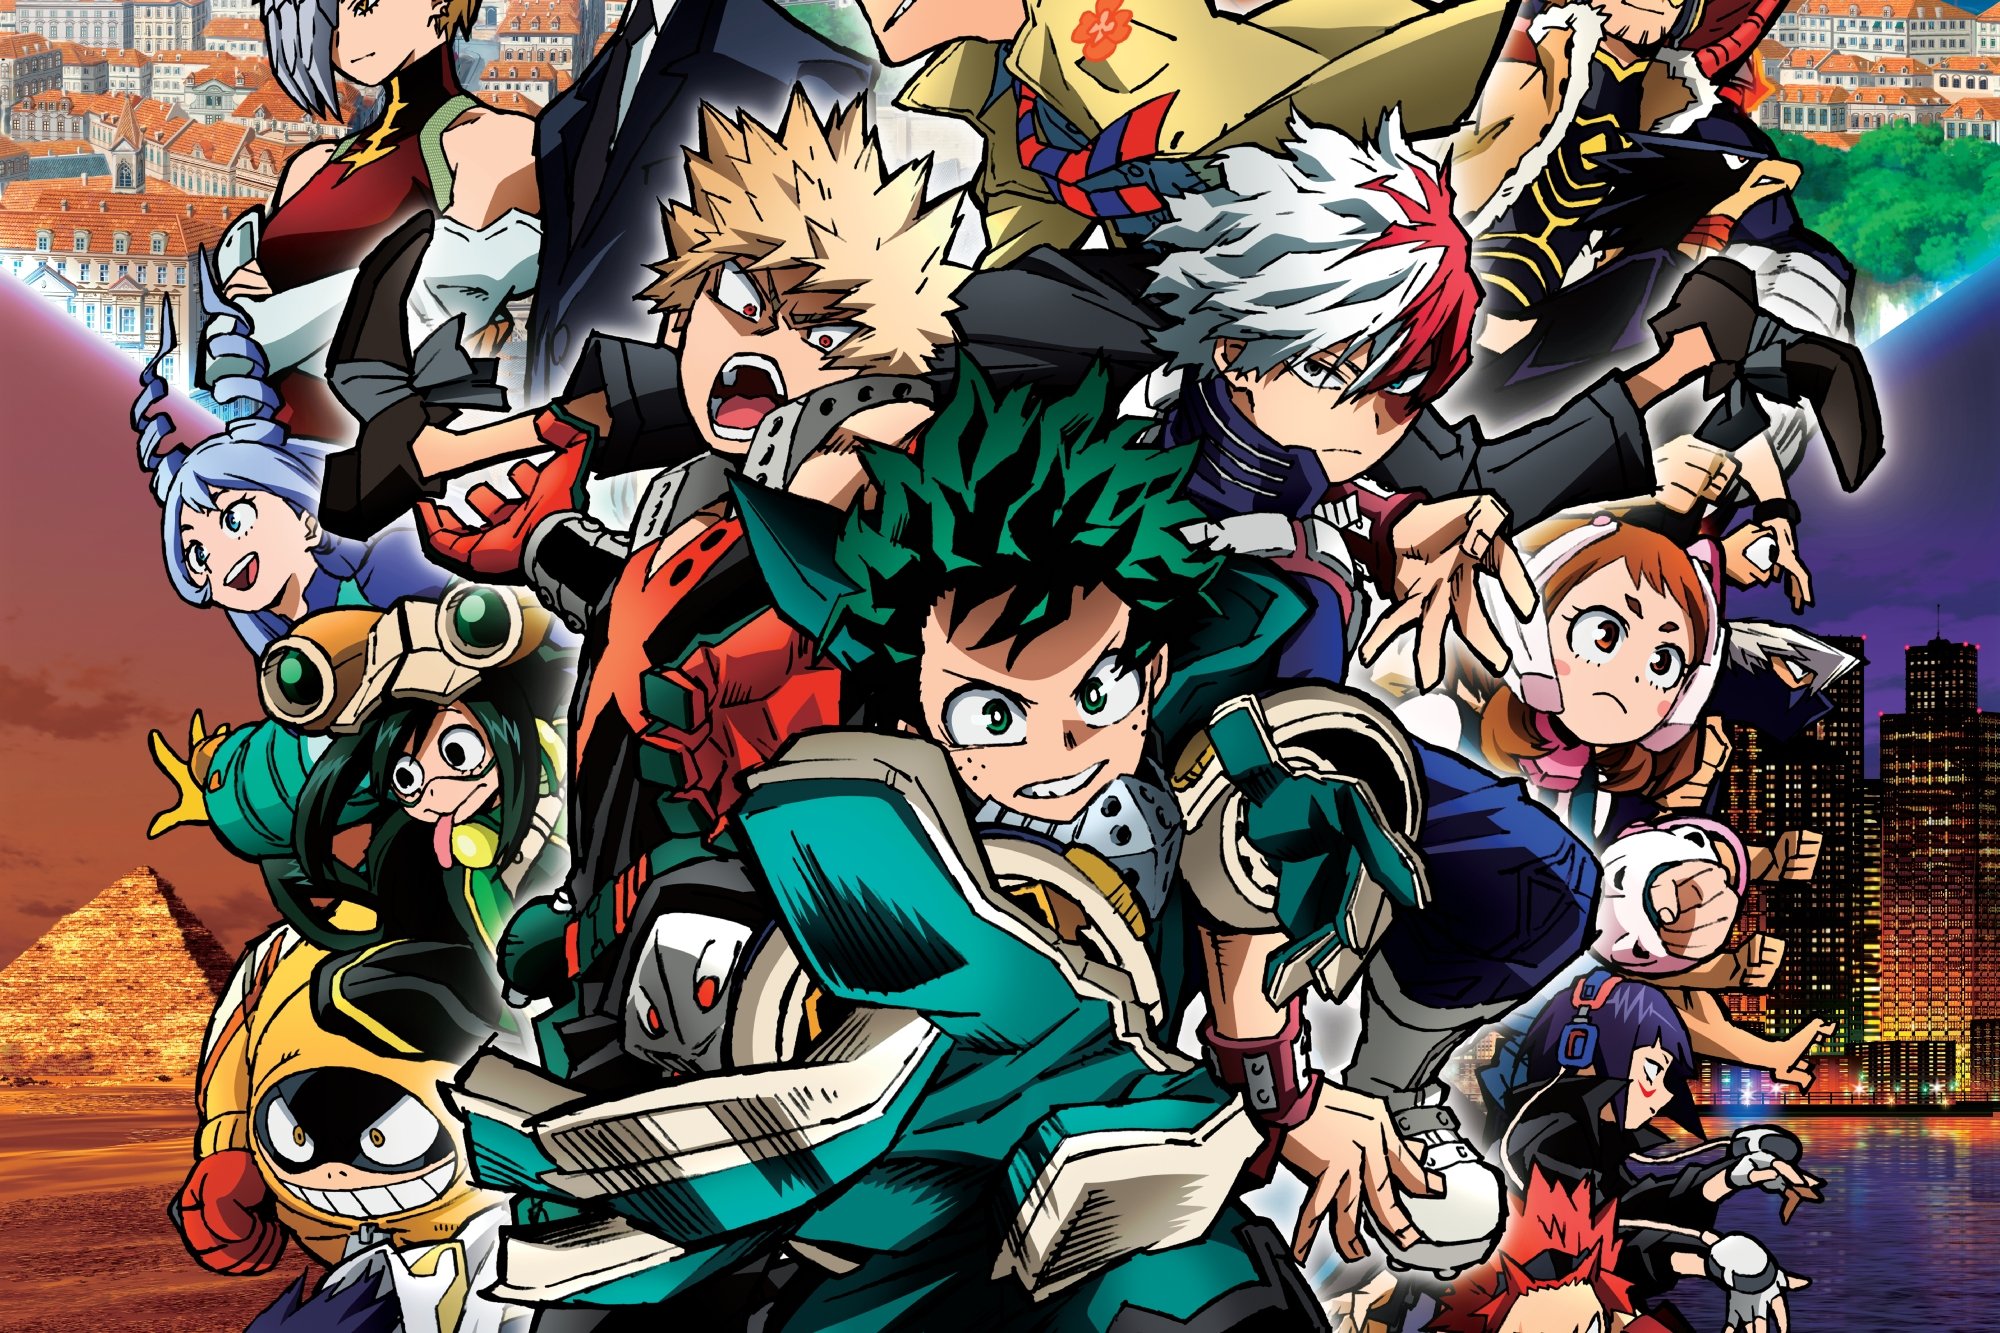 'My Hero Academia' Poster for 'My Hero Academia: World Heroes' Mission' heroes jumping into action with their quirks